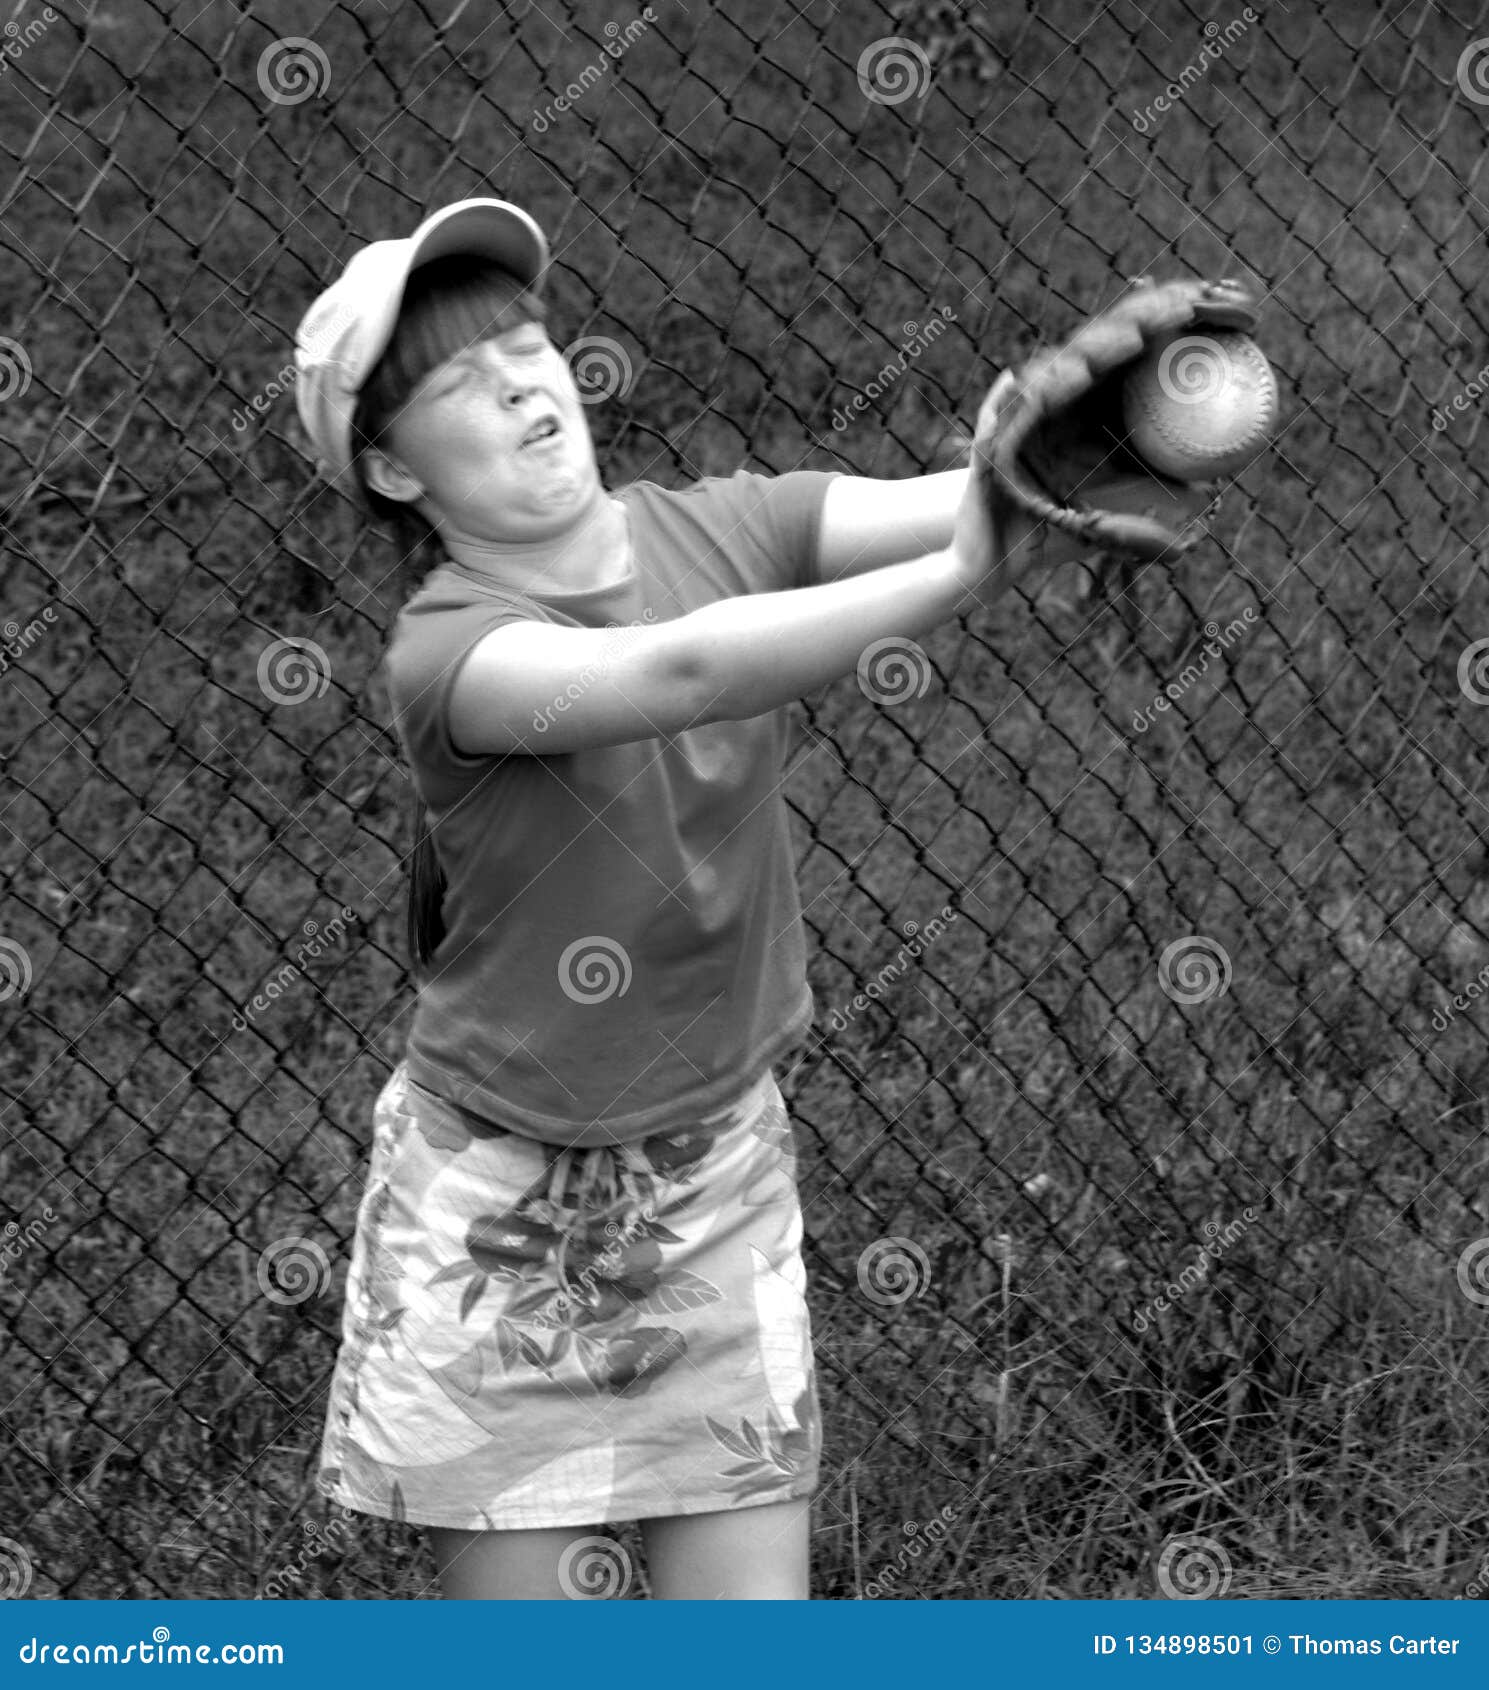 Young Girl Learning To Catch a Ball Editorial Photo - Image of play, yoing:  134898501